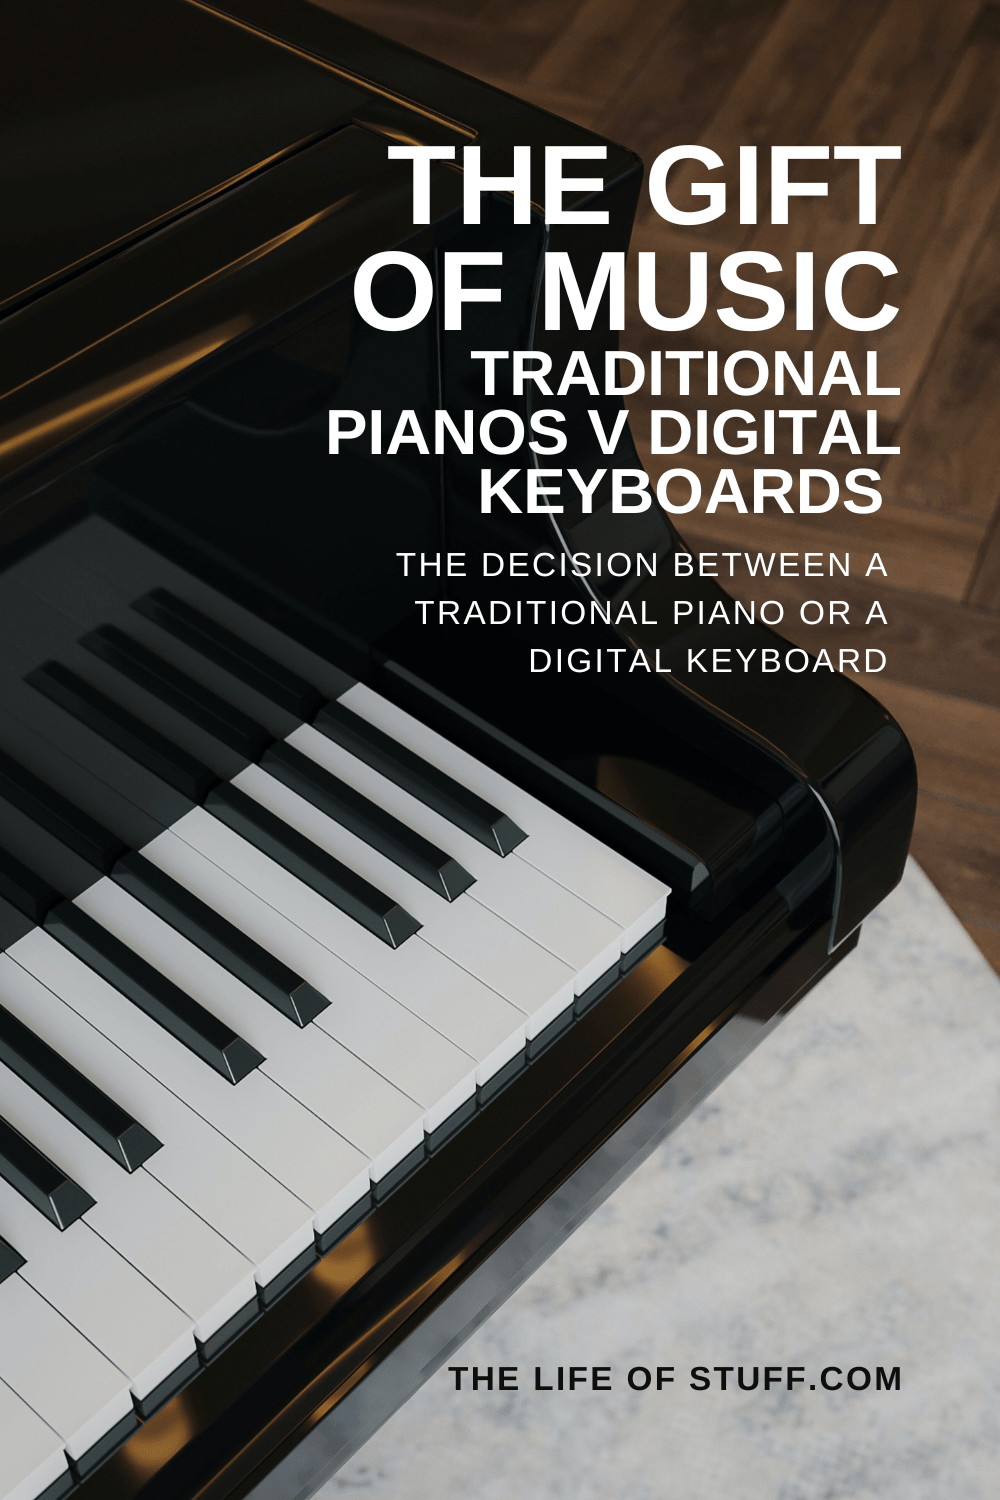 Music Gift Guide - Traditional Pianos V Digital Keyboards - The Life of Stuff